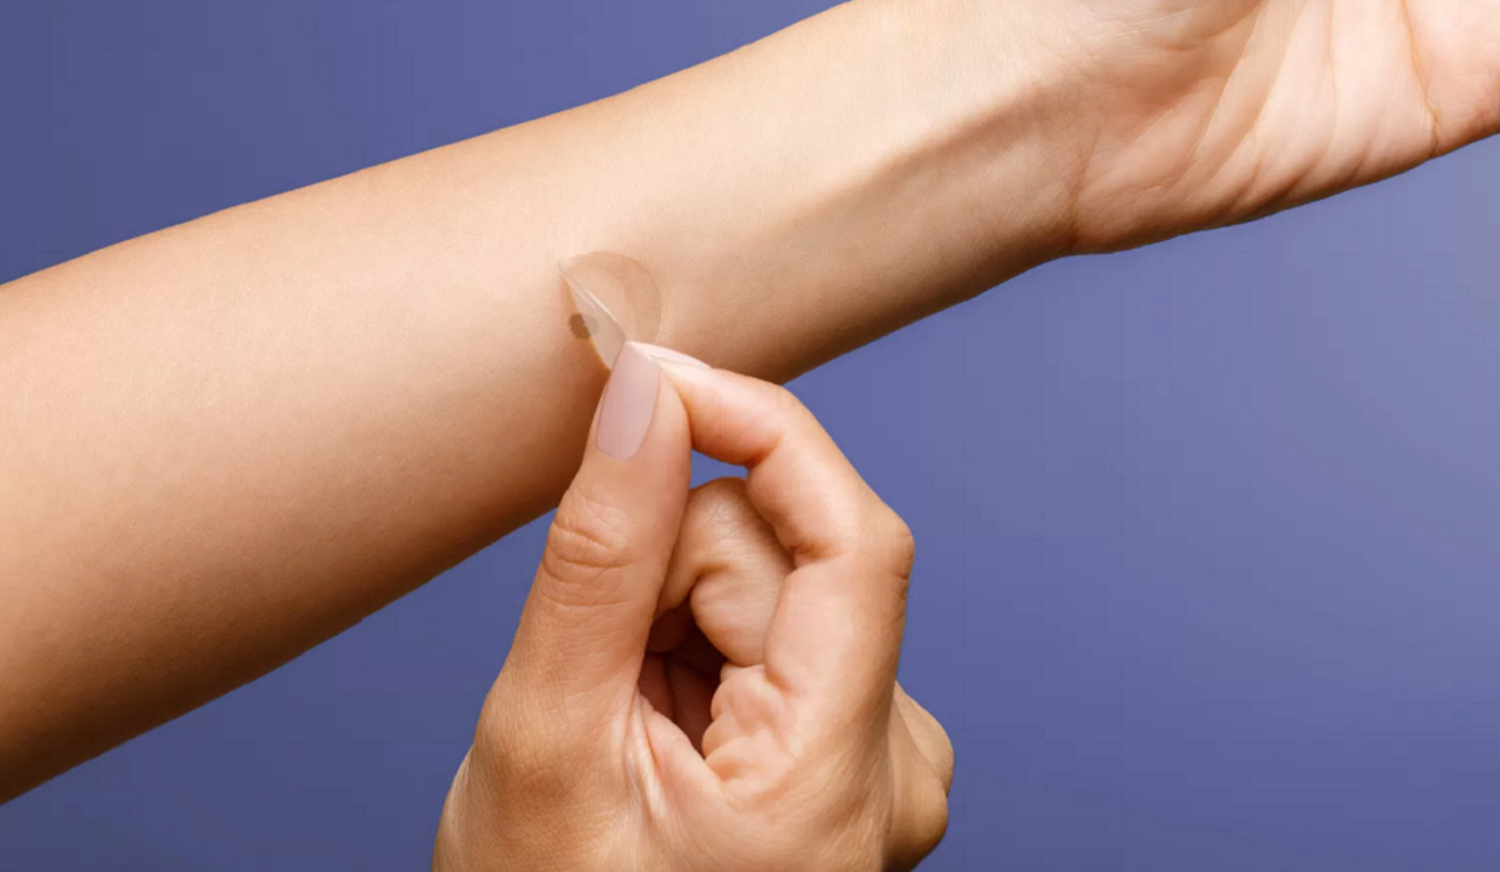 DermTech Smart Sticker skin cancer test on a person with white arms against a purple background